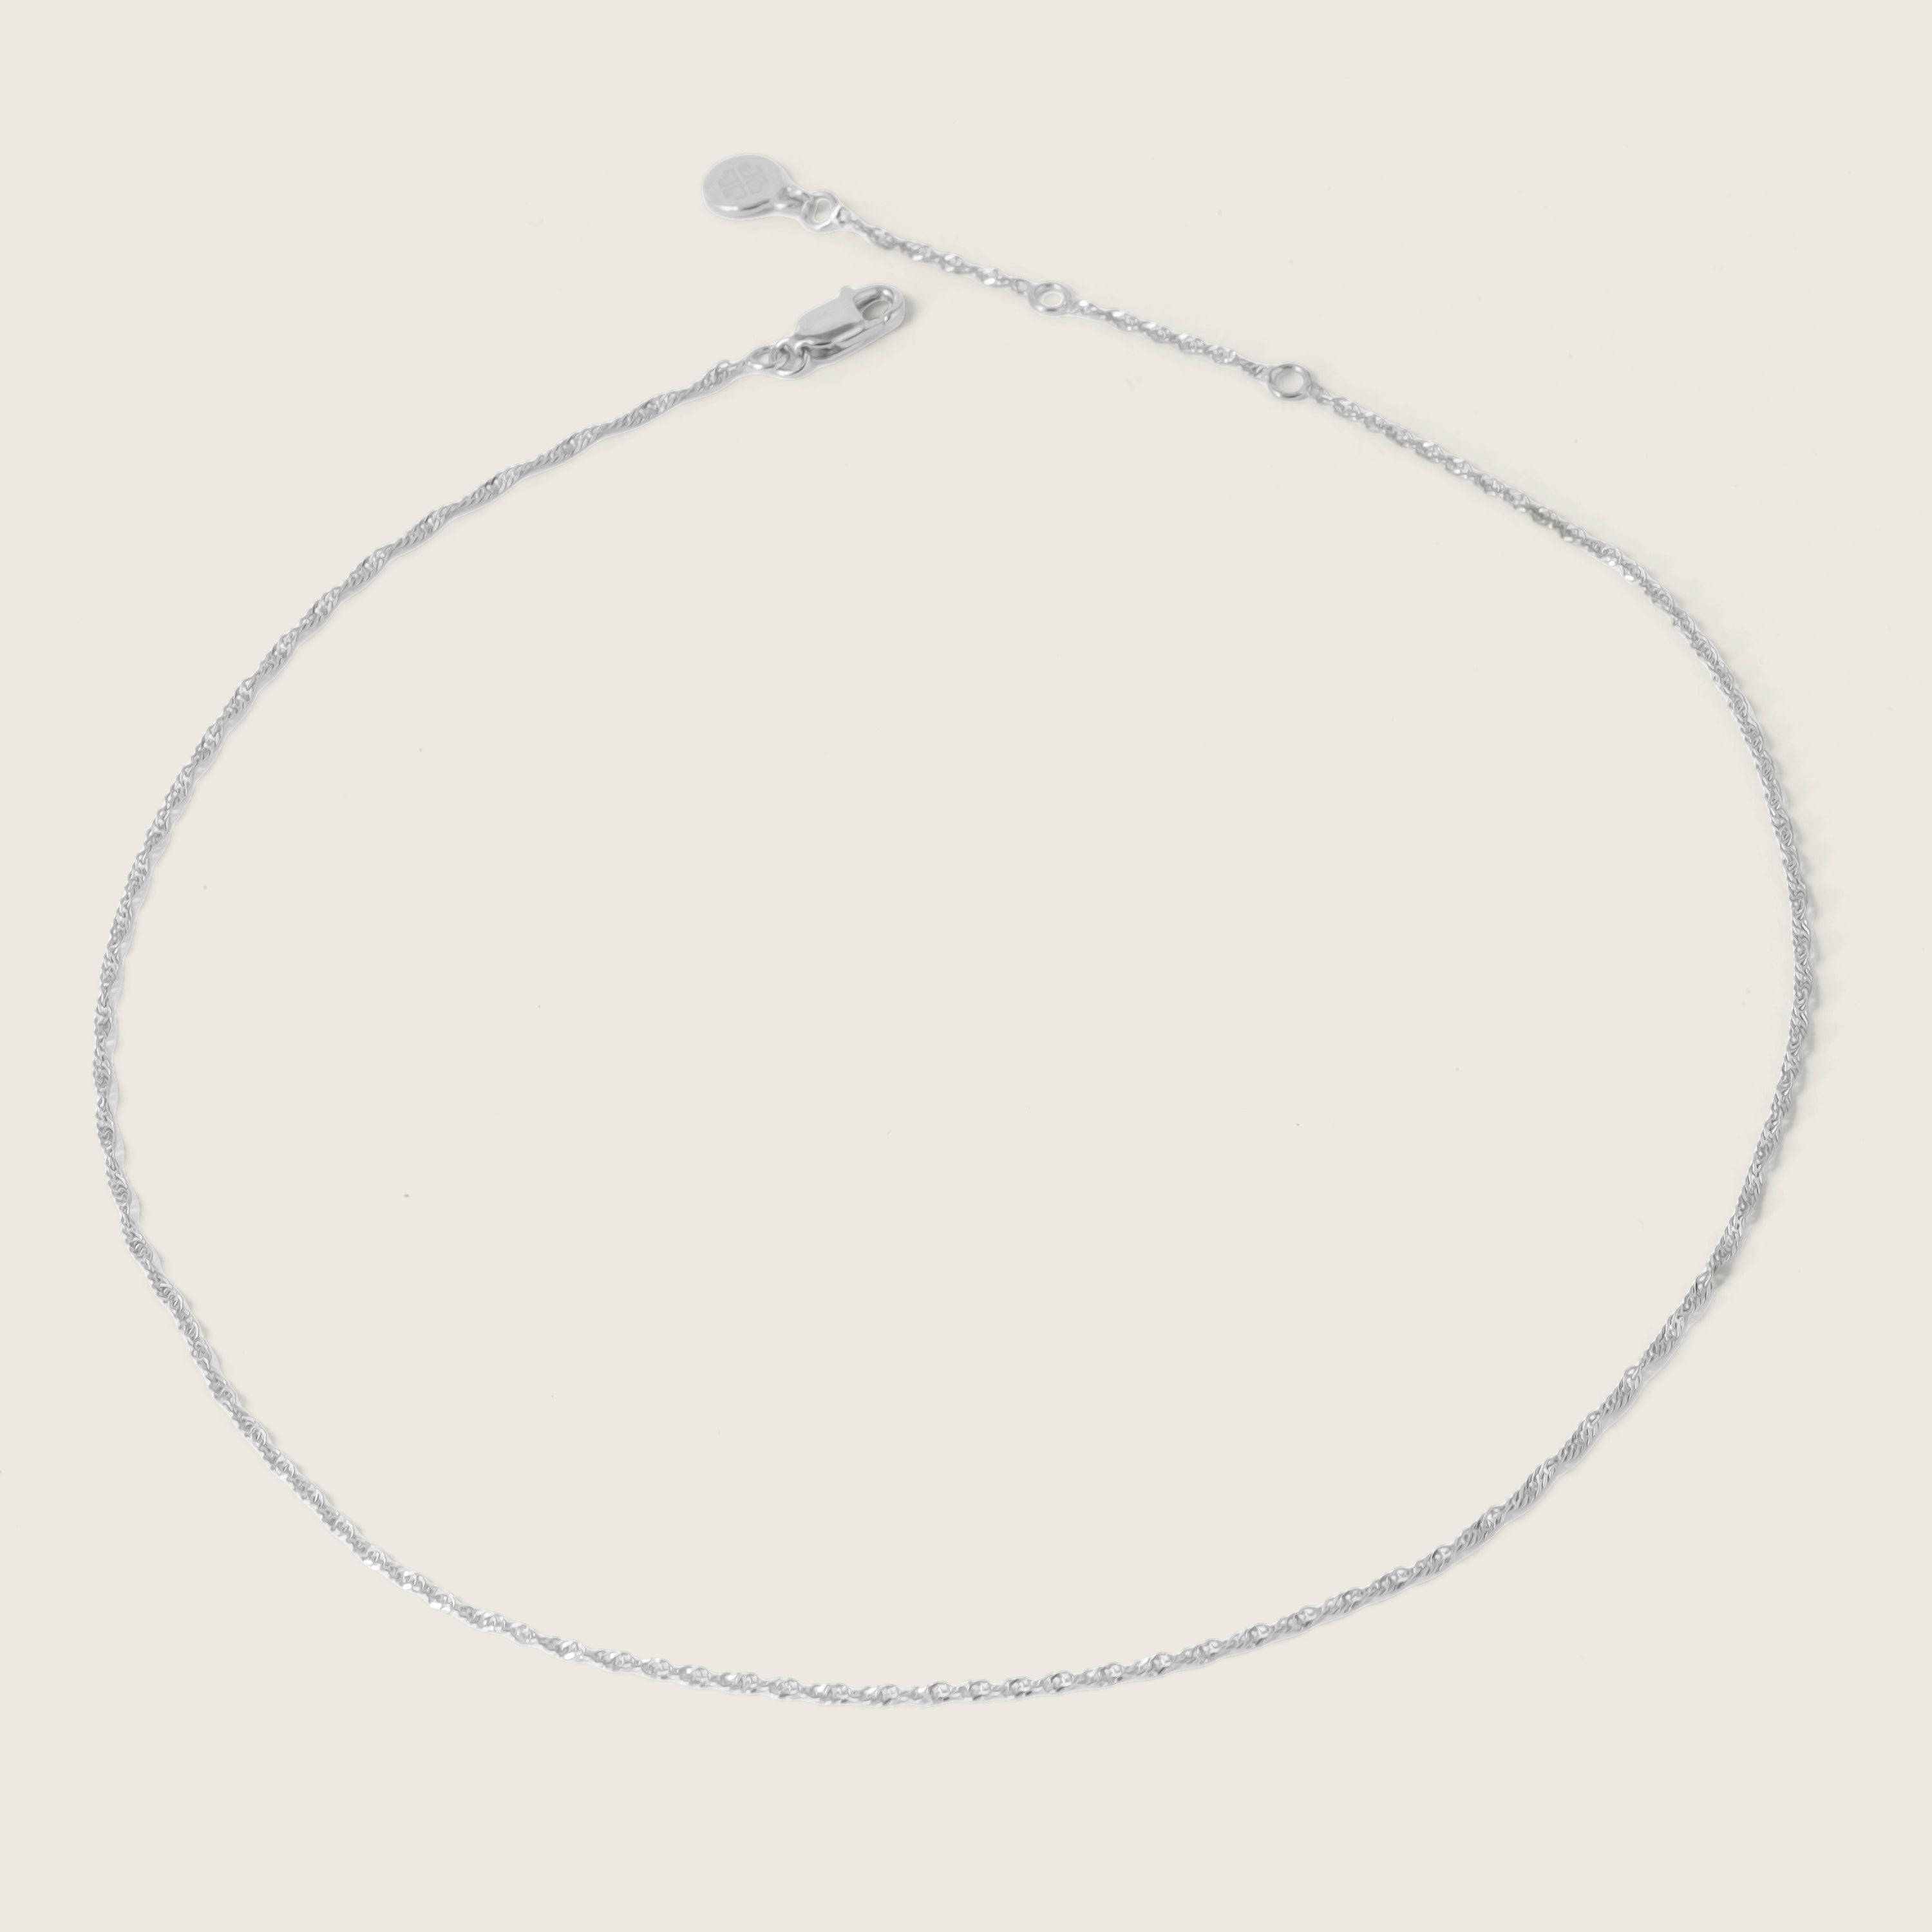 Silver Singapore Chain Choker Necklace